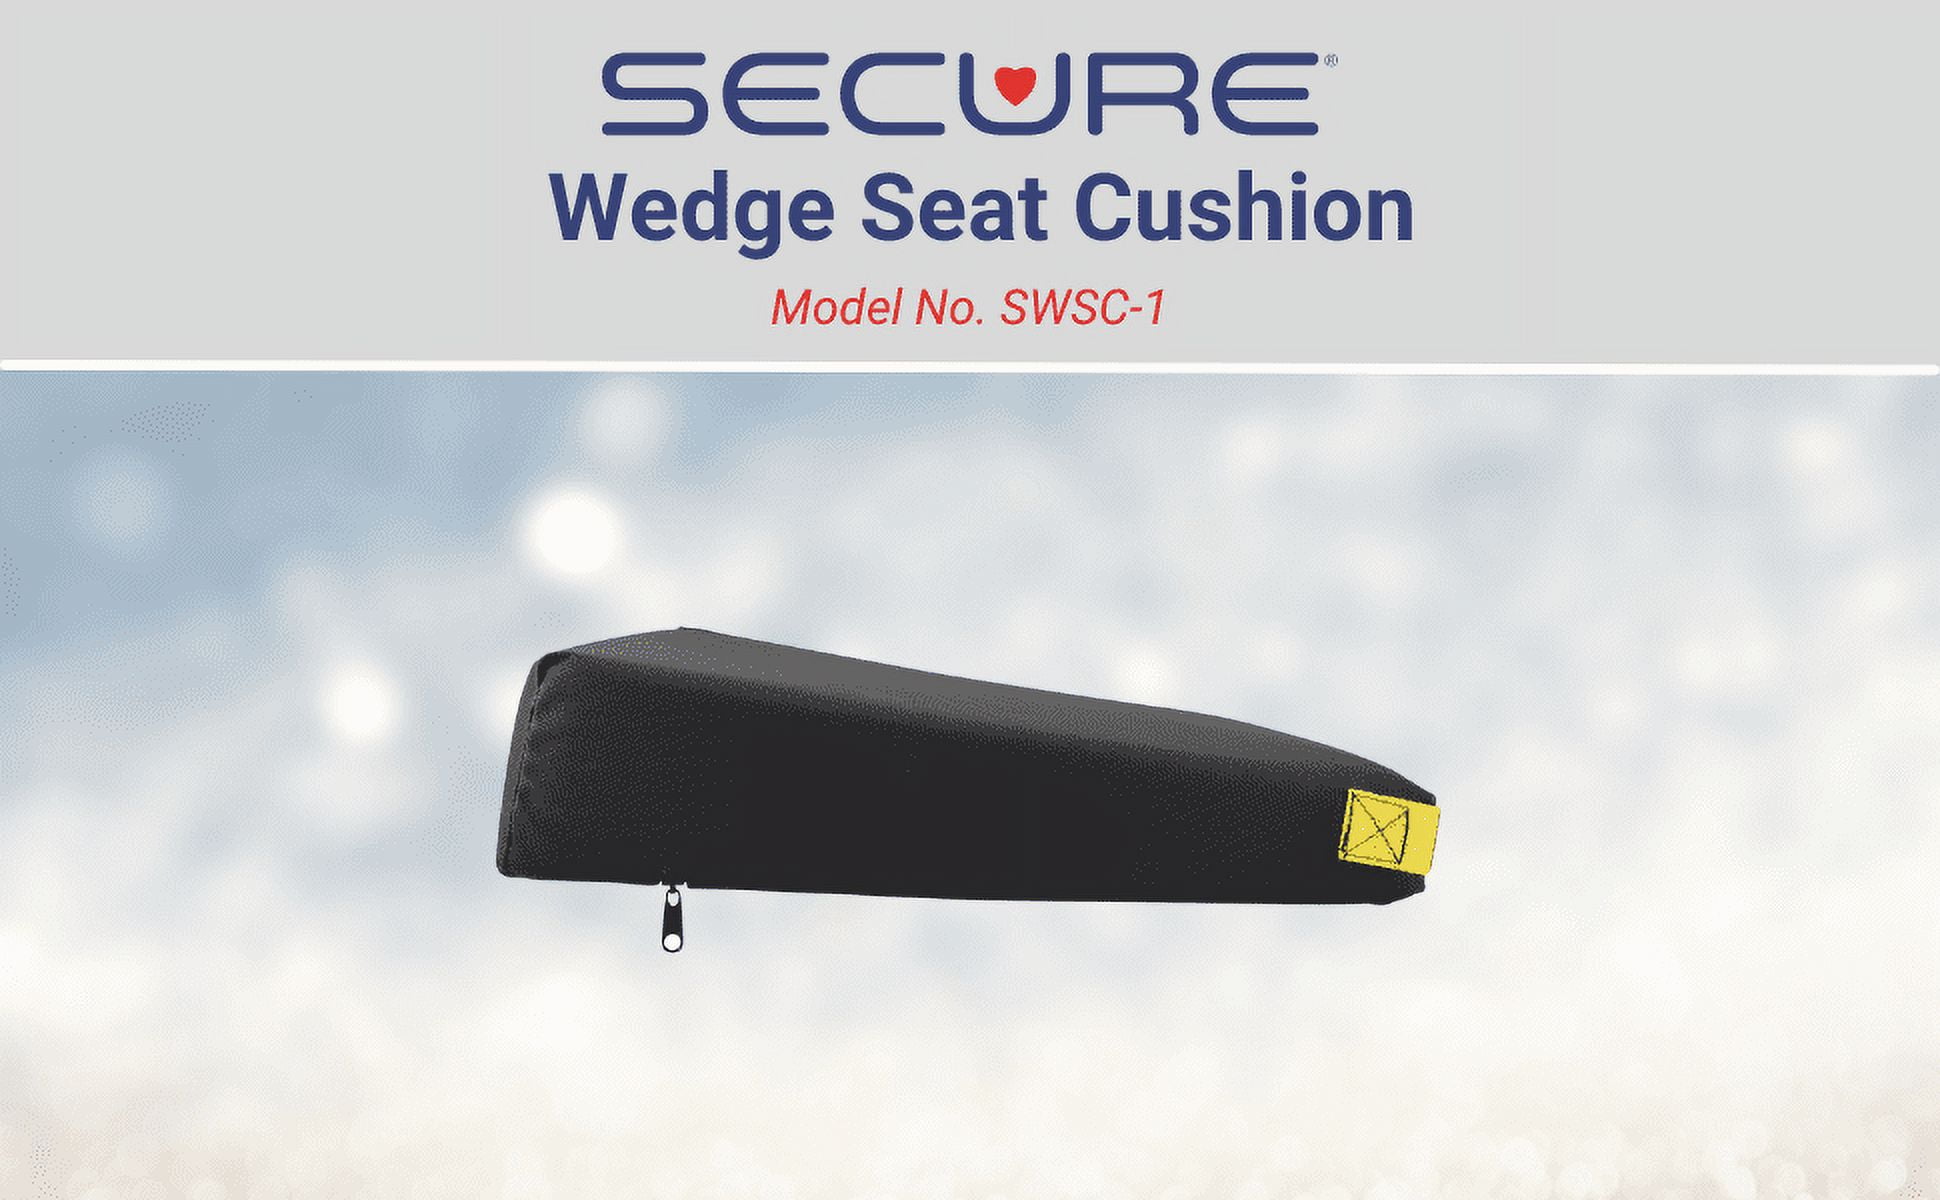 Secure Wheelchair Wedge Pommel Seat Cushion w/Safety Strap - Convex Bottom - Low Profile Pommel for Comfort & Easier Transfer